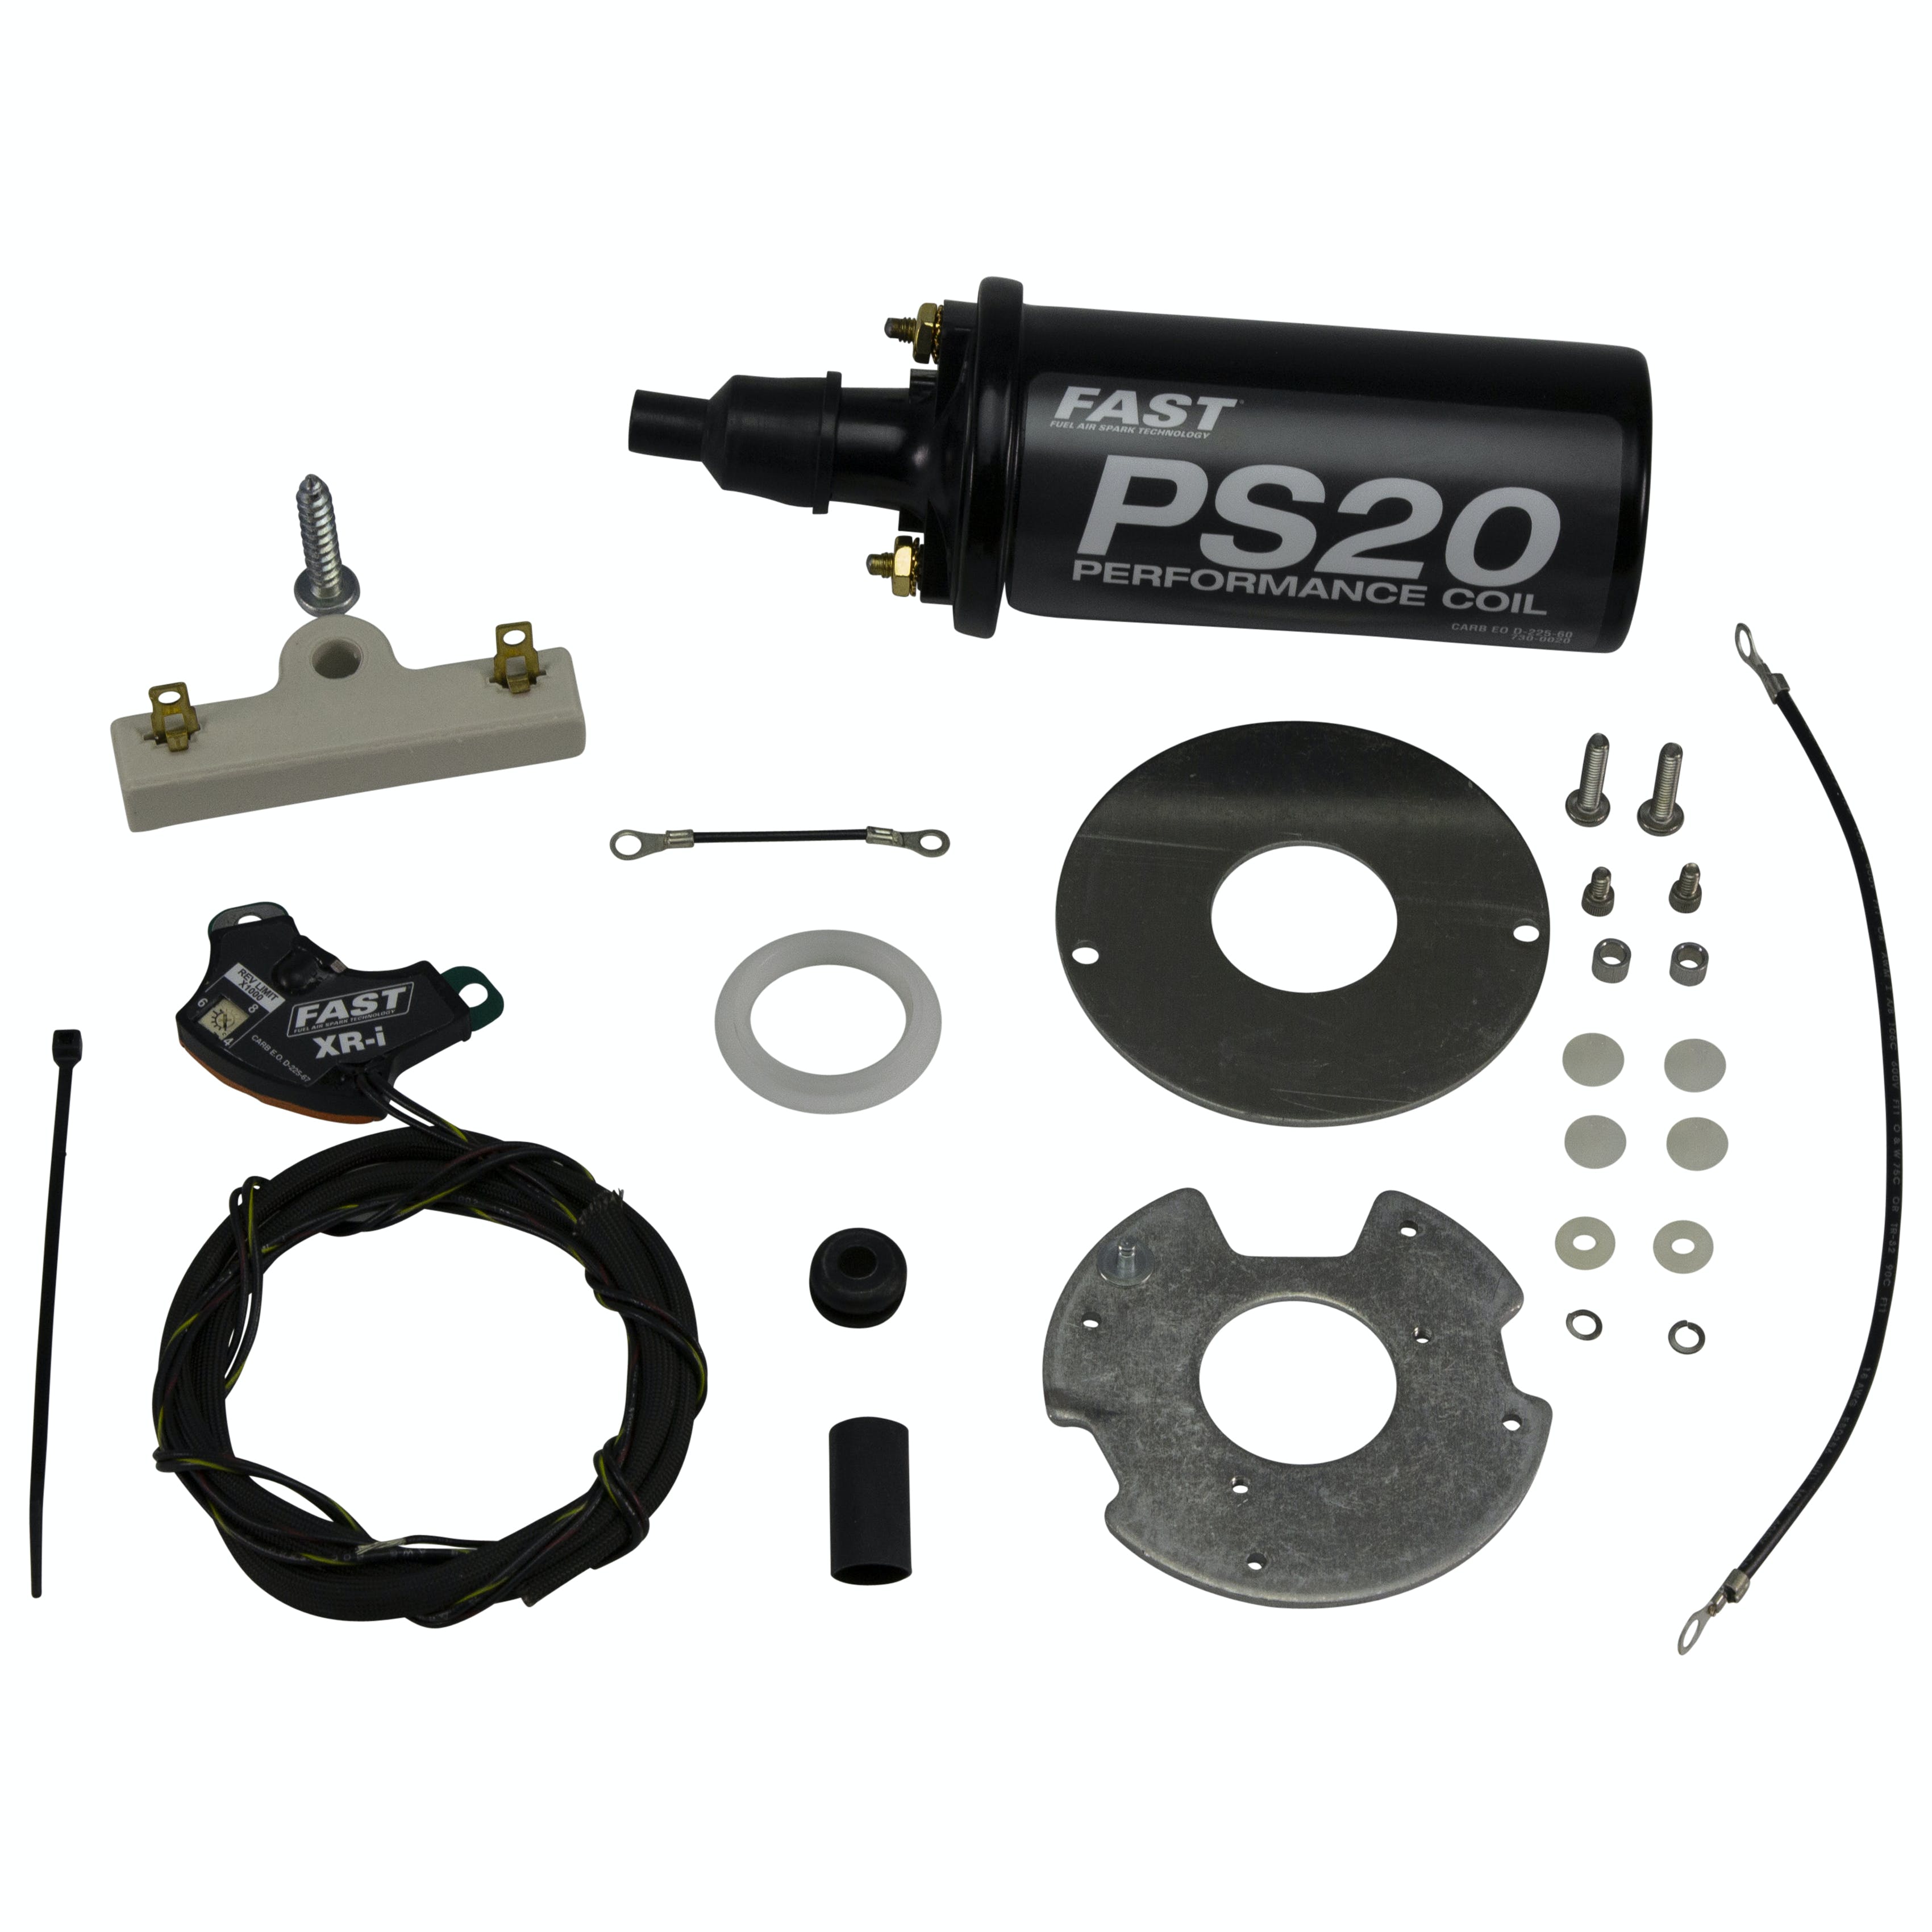 FAST - Fuel Air Spark Technology 750-1705 XR-I Points Replacement with PS20 Coil for Ford from 1959 to 1974